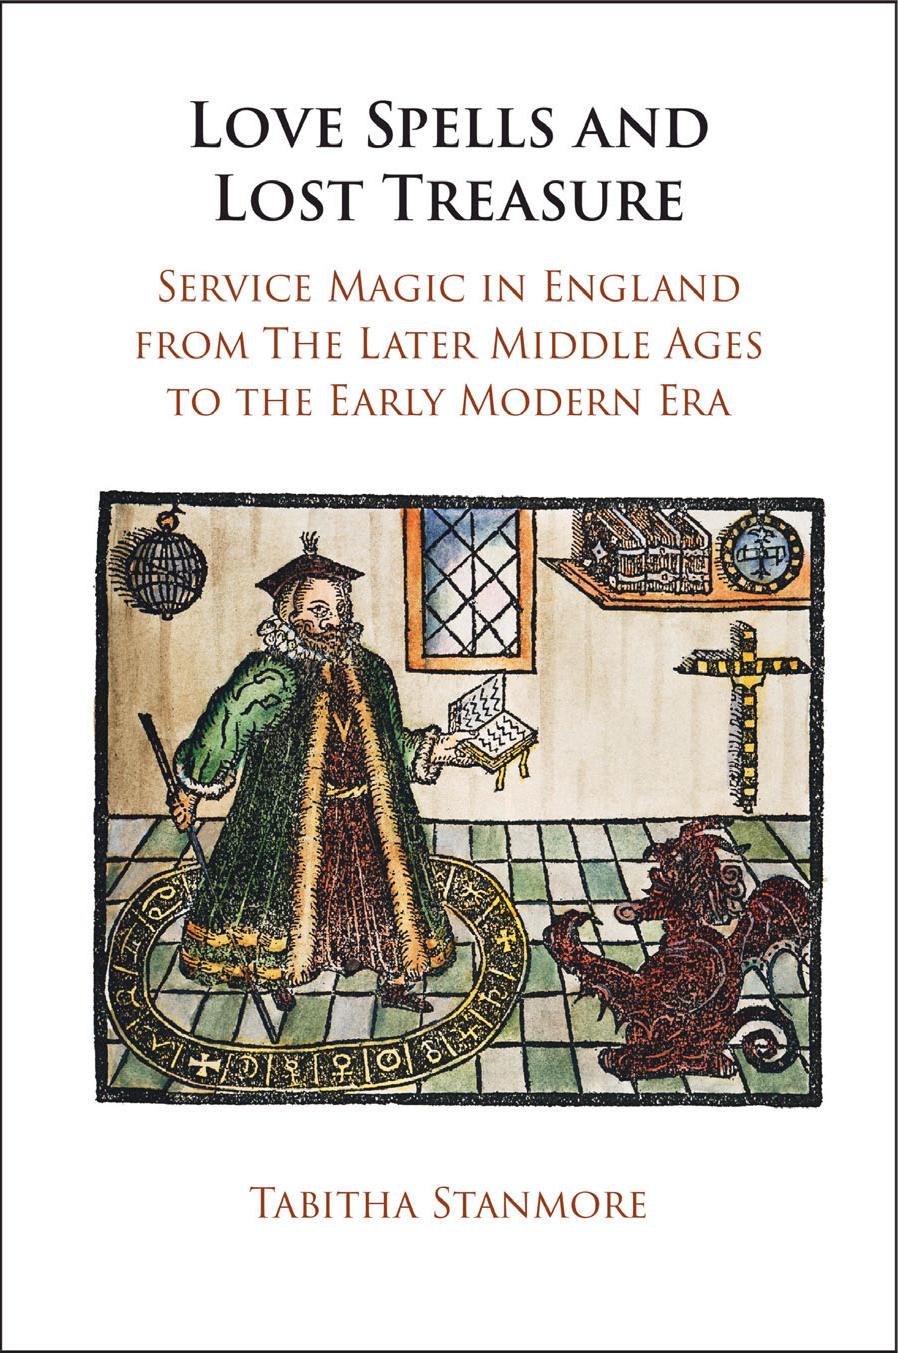 Love Spells and Lost Treasure: Service Magic in England from the Later Middle Ages to the Early Modern Era by Tabitha Stanmore